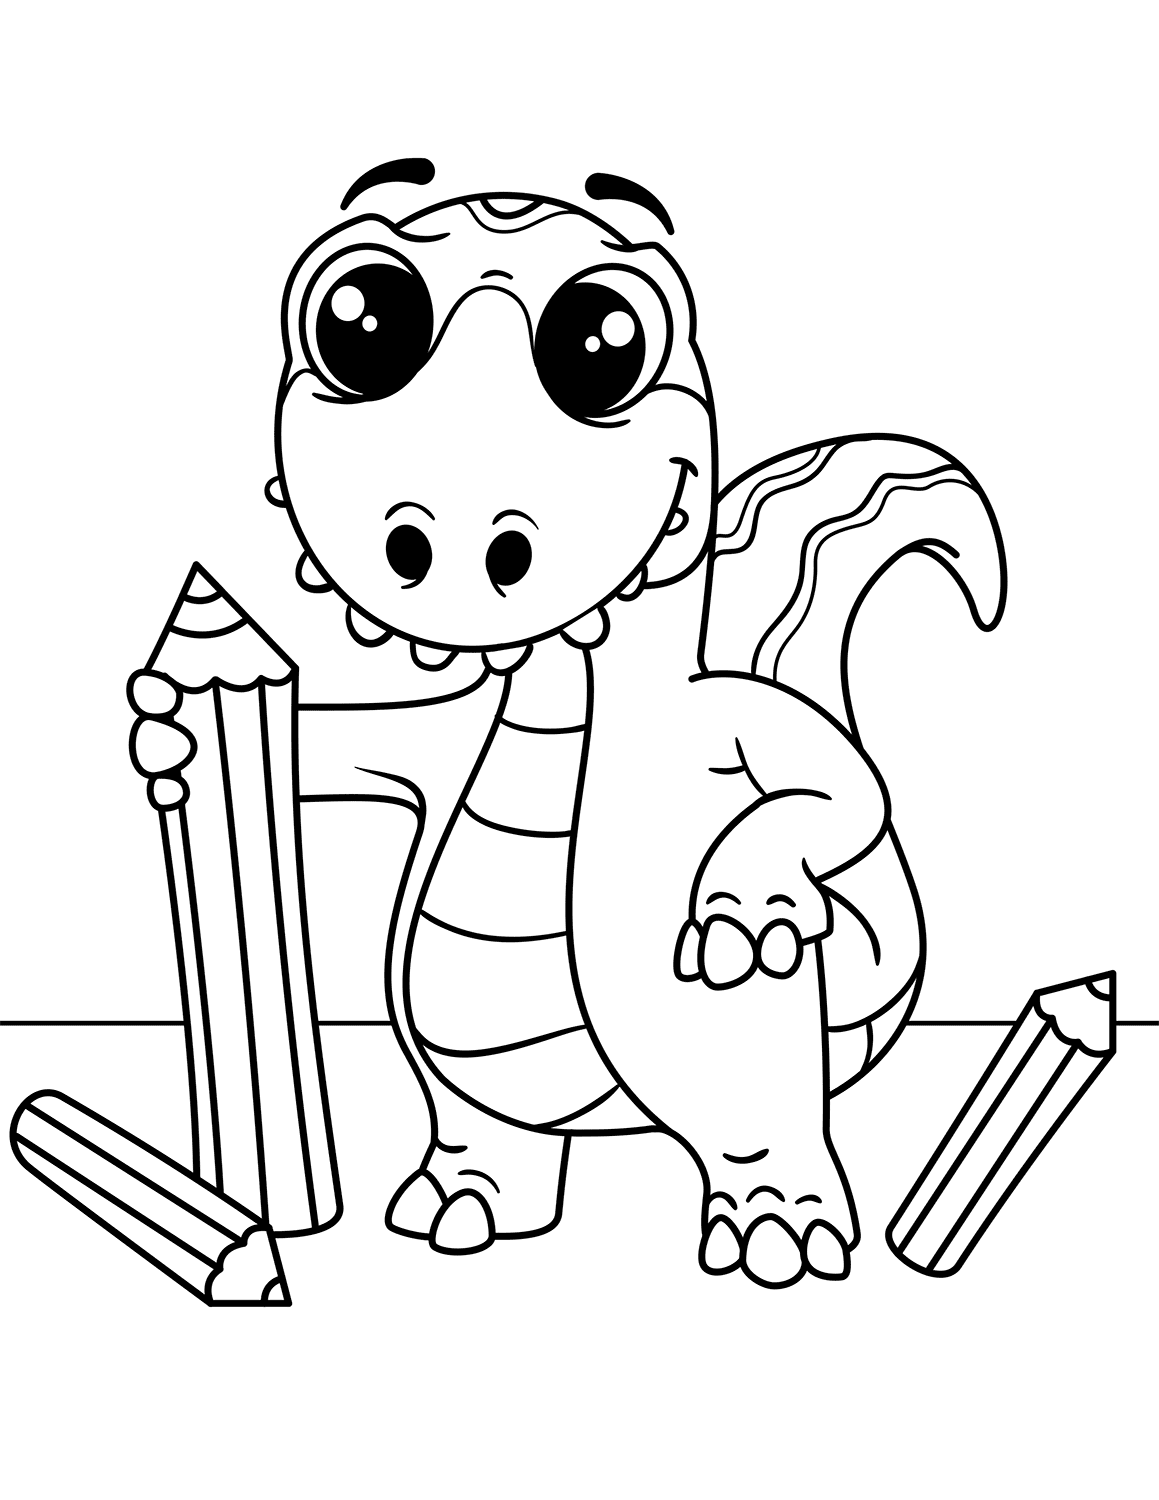 Baby Dinosaur With Pencils Coloring Page